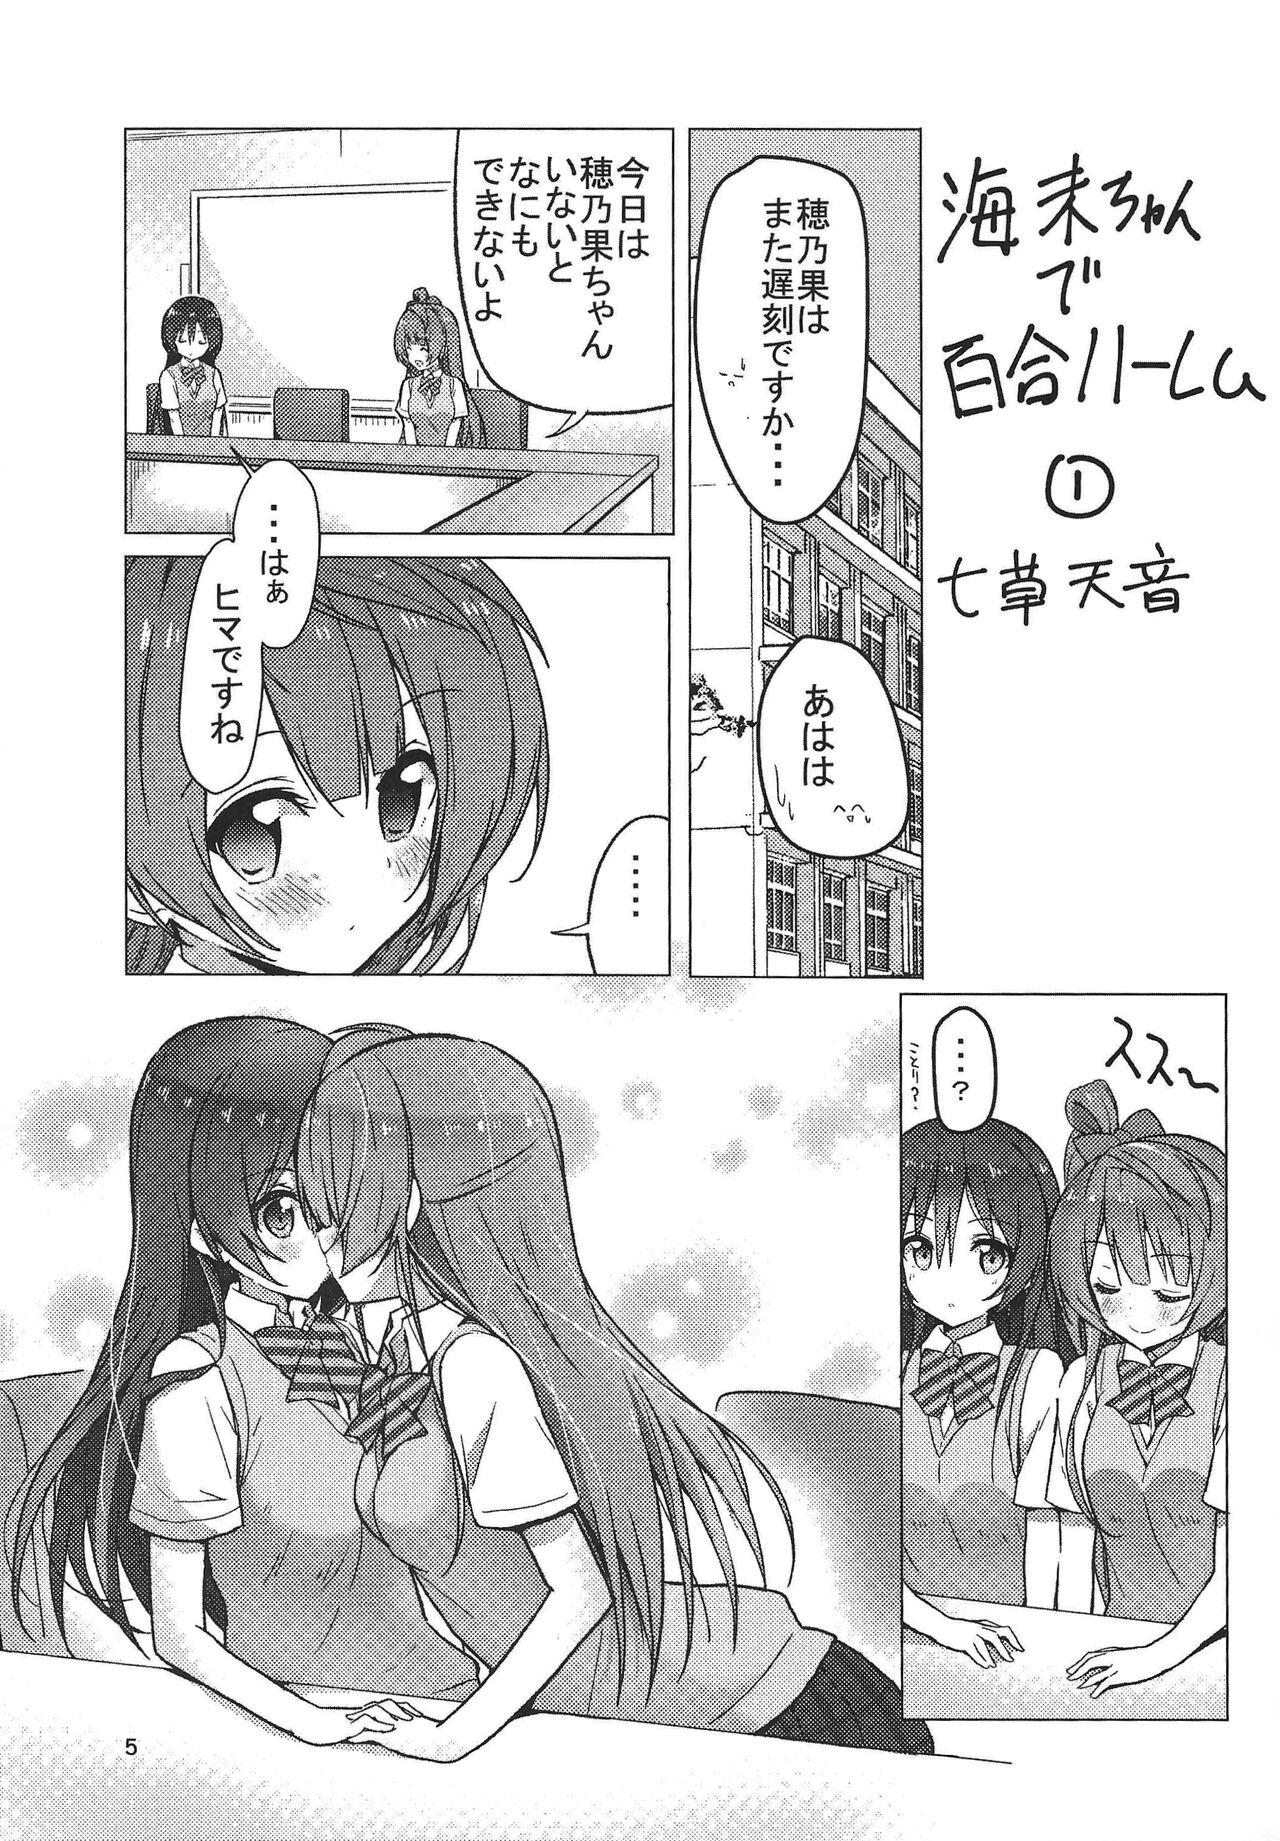 Insertion 海未ちゃん笑顔で1,2,Jump! - Love live Students - Page 4